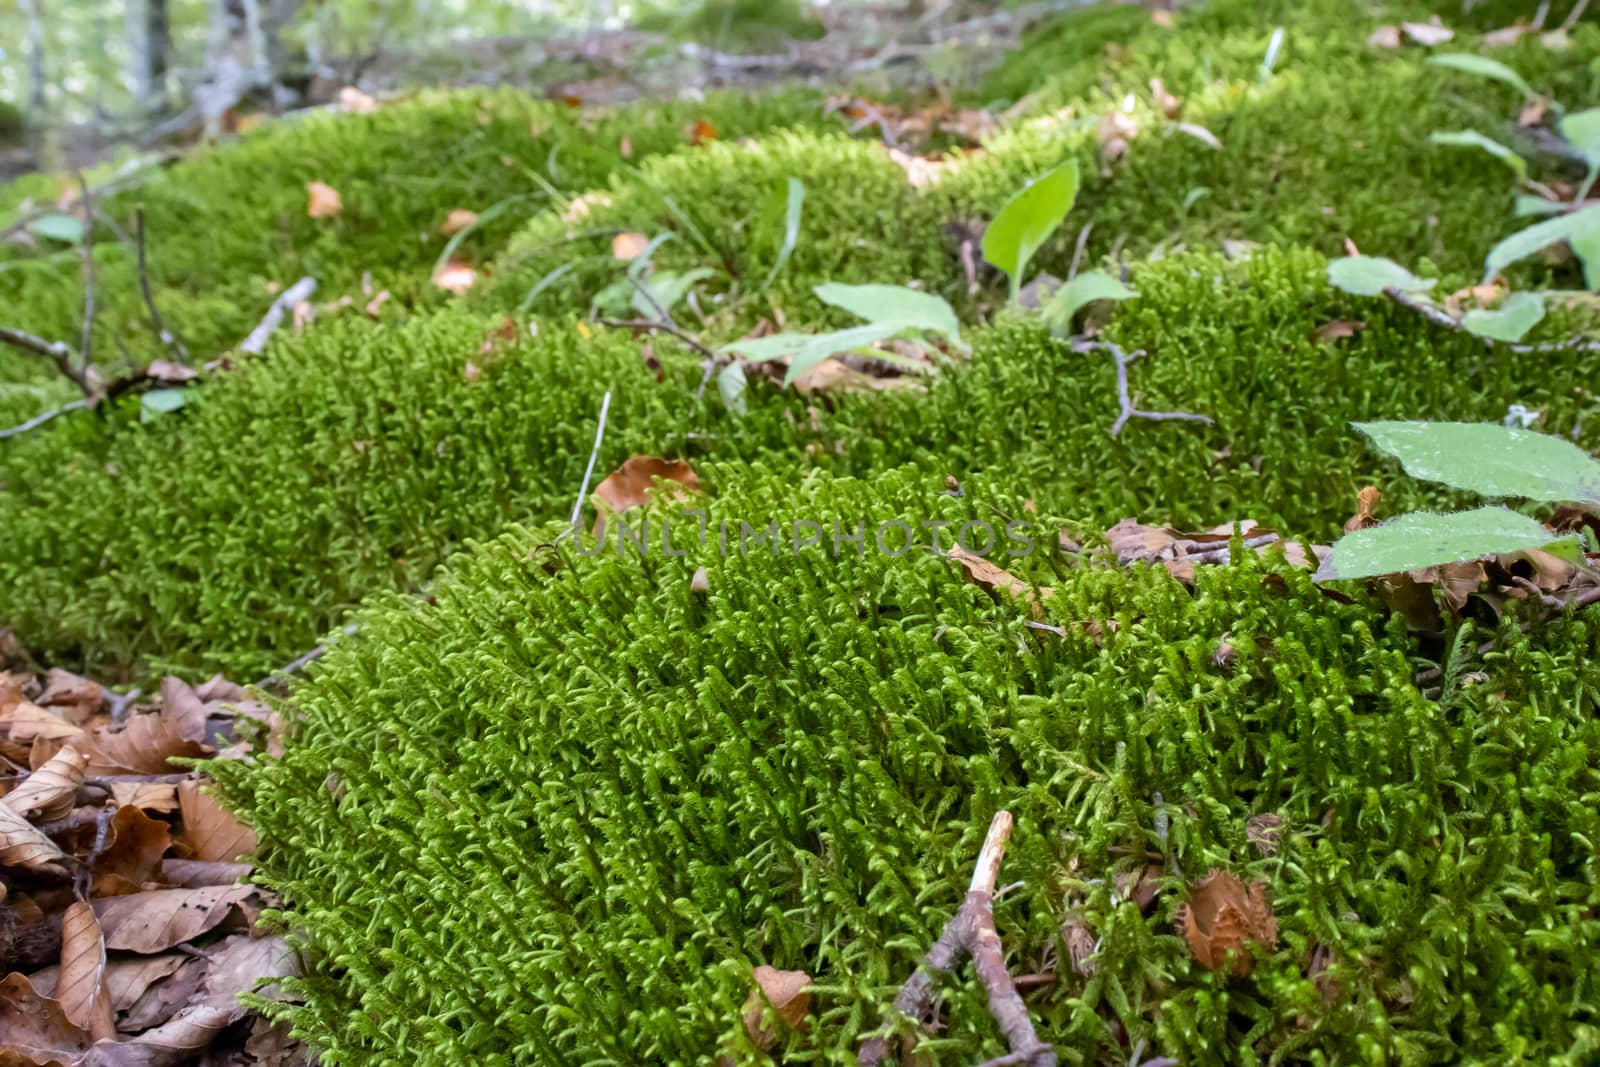 Ground covered with green moss close up.